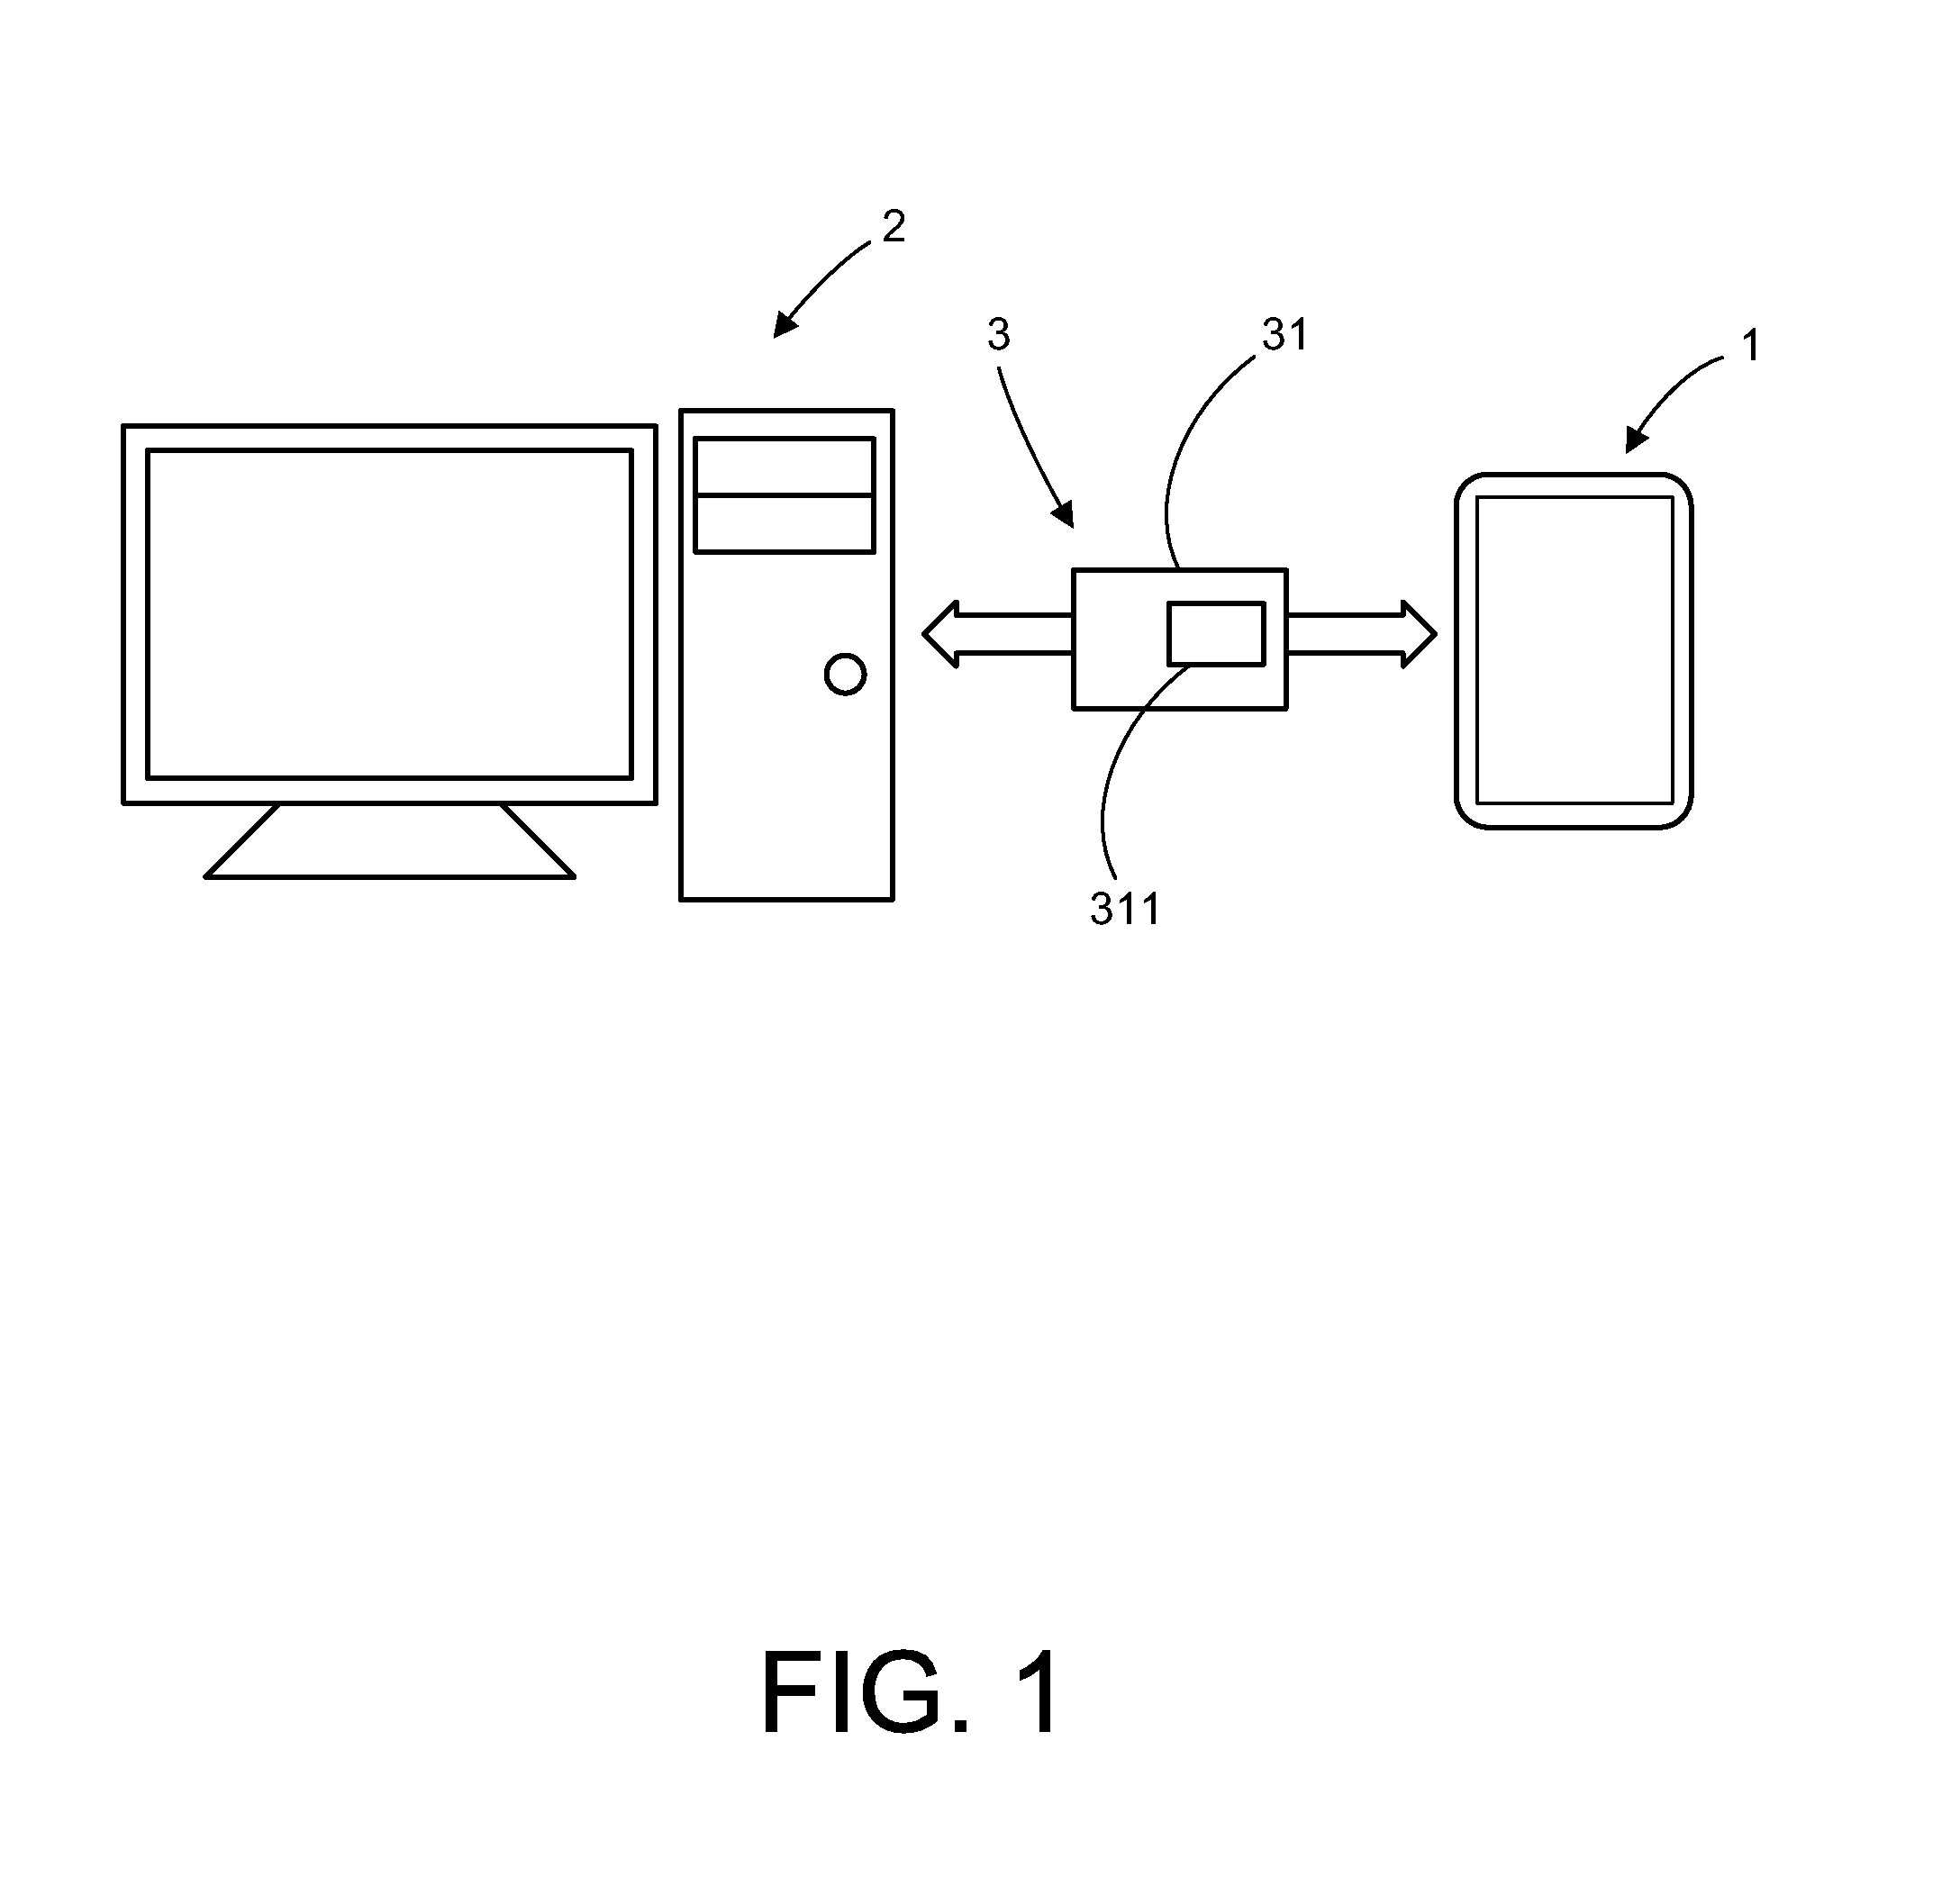 Method for showing an instant notice on a display of computer according to an incoming event of a mobile device